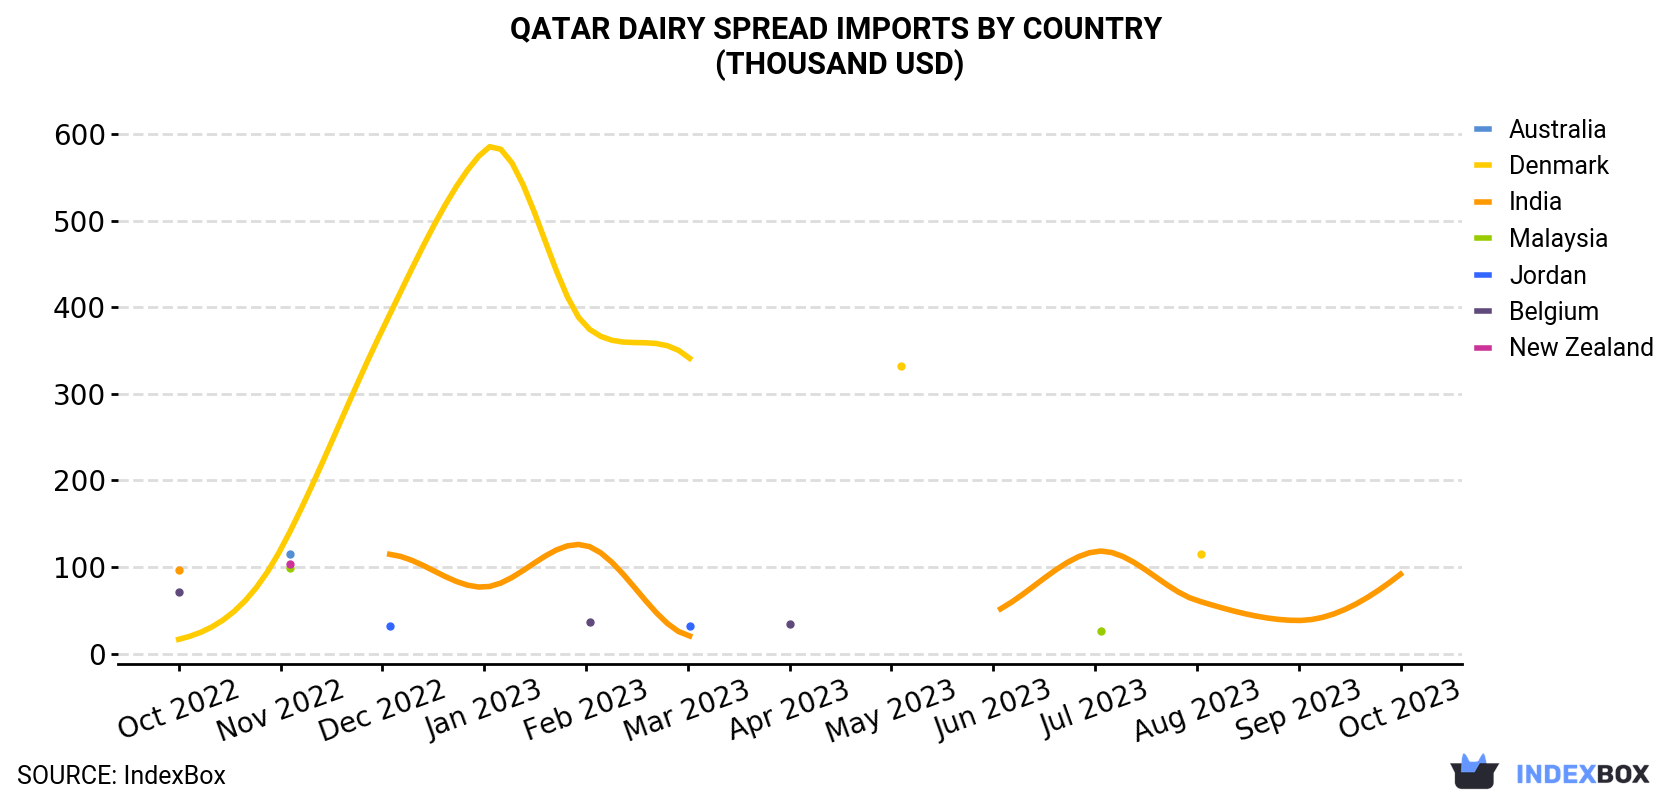 Qatar Dairy Spread Imports By Country (Thousand USD)